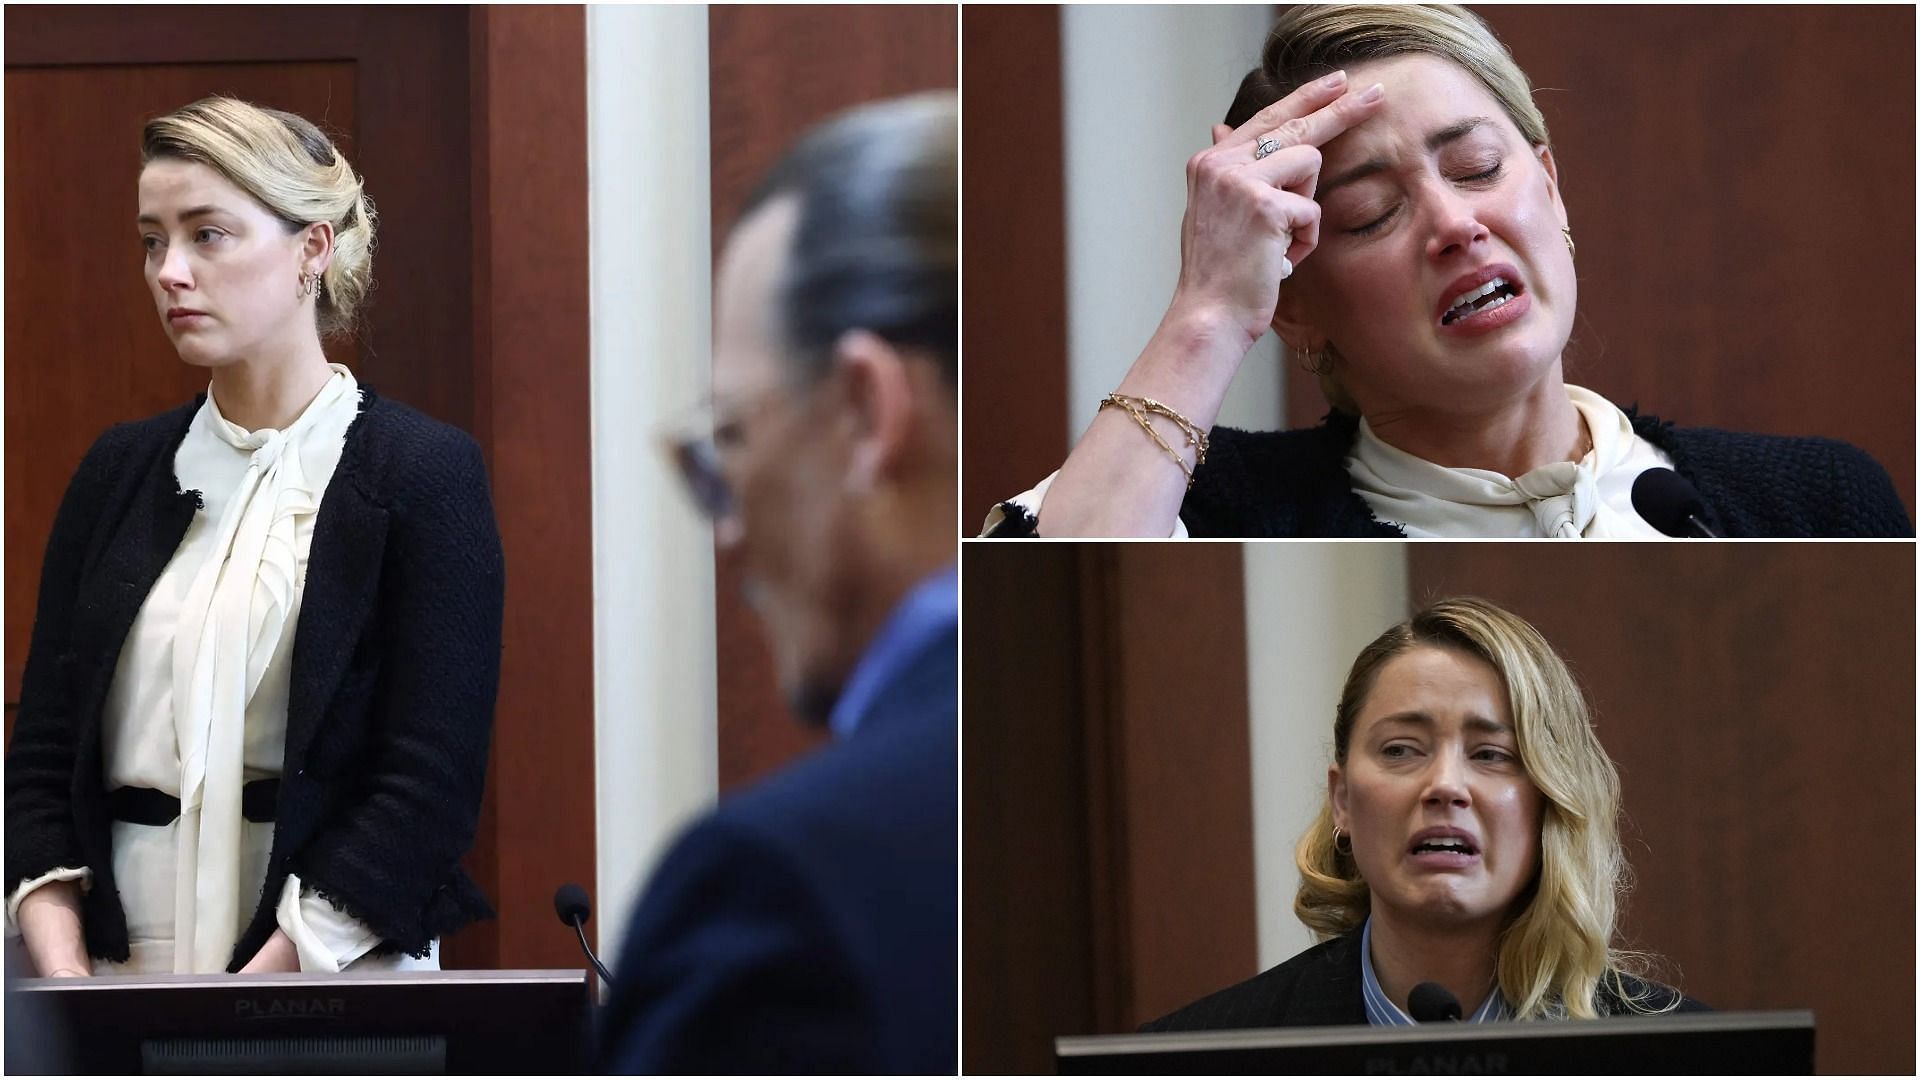 Amber Heard in the trial (Image via Sportskeeda and Getty Images)